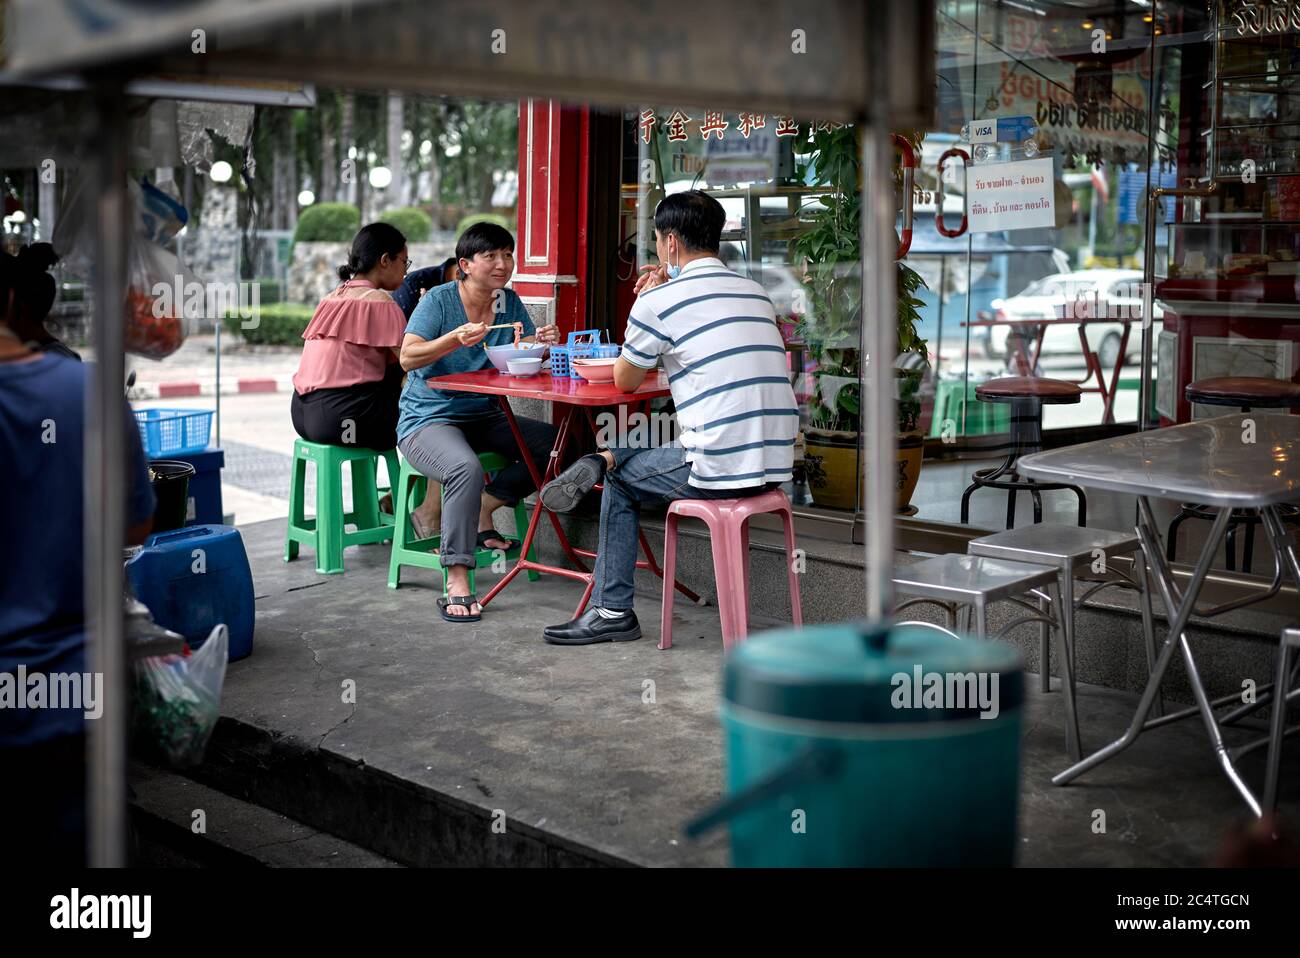 Thailand people eating outside on the street pavement Southeast Asia Stock Photo